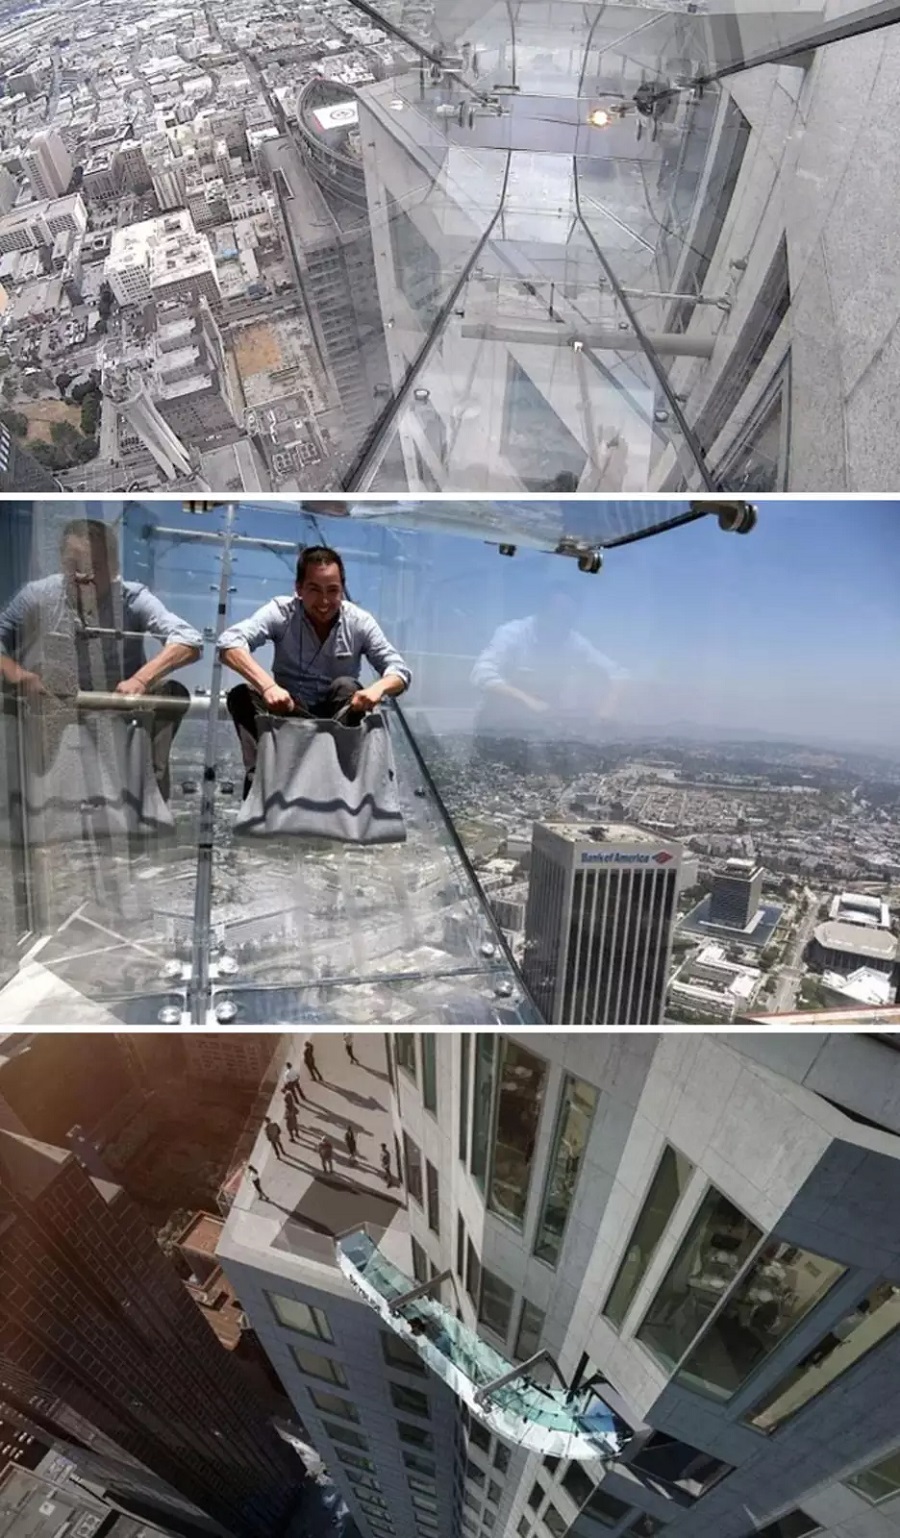 Skyslide At OUE Skyspace In Los Angeles, CA | An Outdoor Glass Slide Attached To The Exterior Of The U.S. Bank Tower. The Skyslide Is 45 Feet Long, About Four Feet Wide, And Made Entirely With 1.25-Inch Glass. Visitors Glide From The 70th To The 69th Floor. Now Permanently Closed